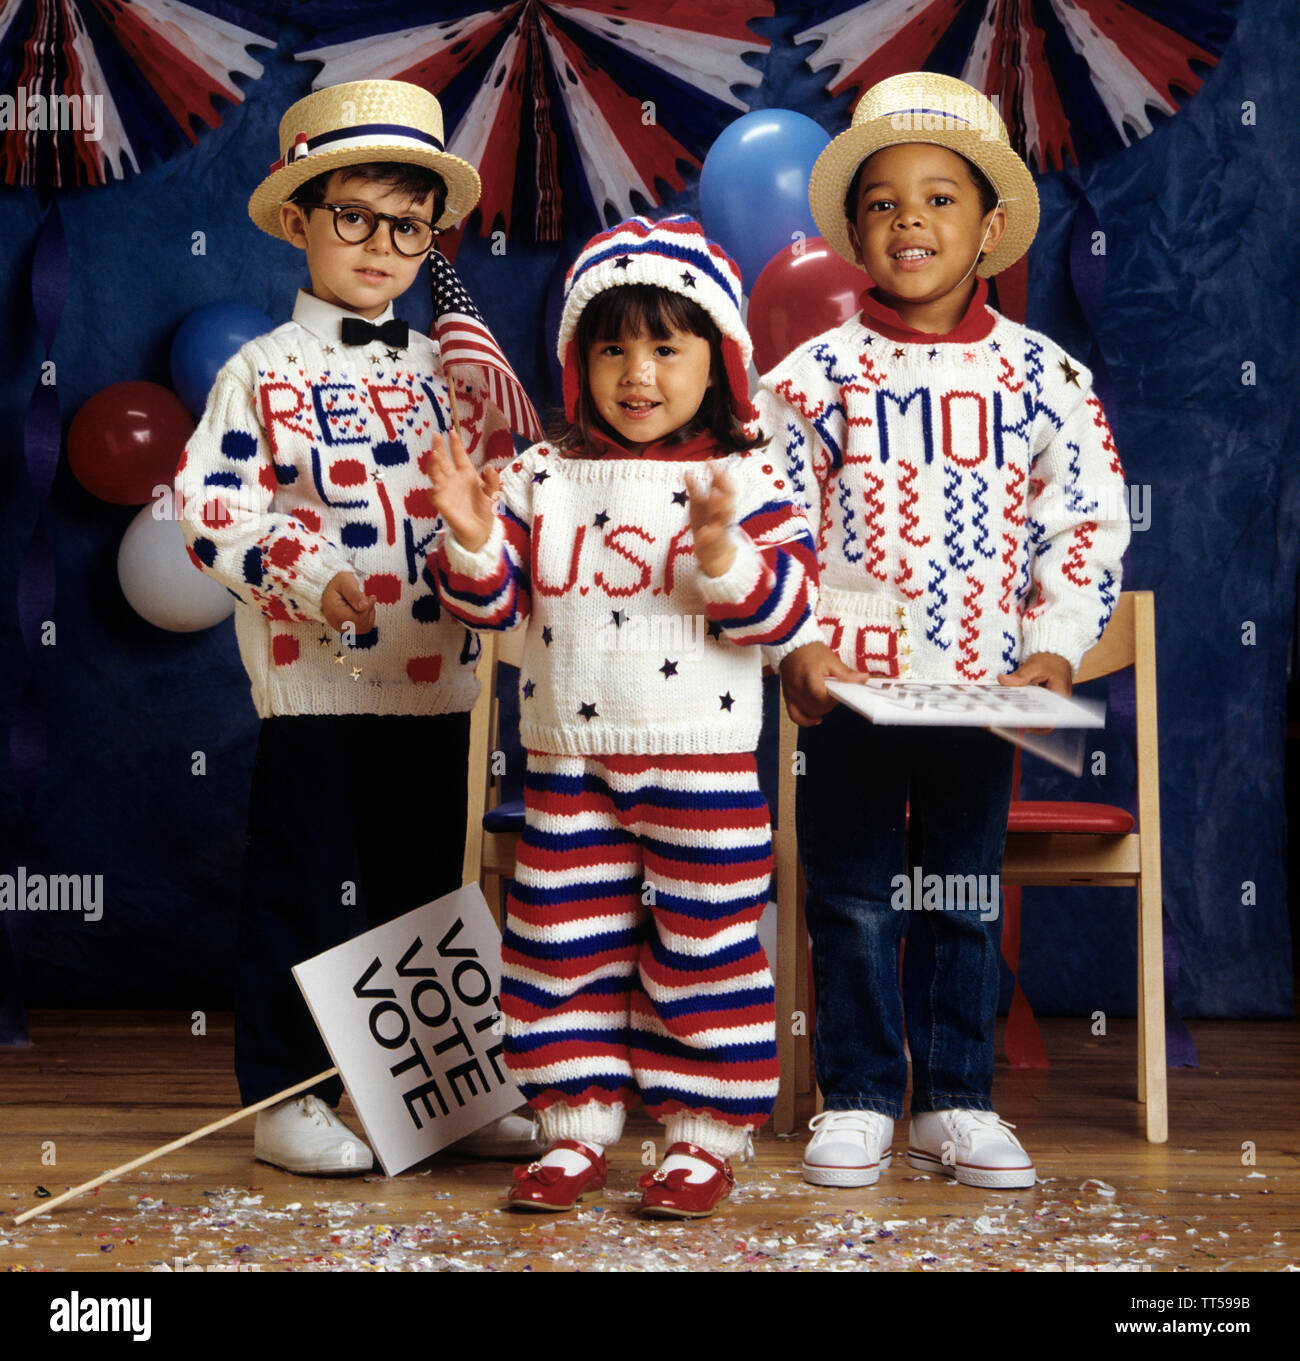 Three children dressed in knitted clothes to get out the vote Stock Photo